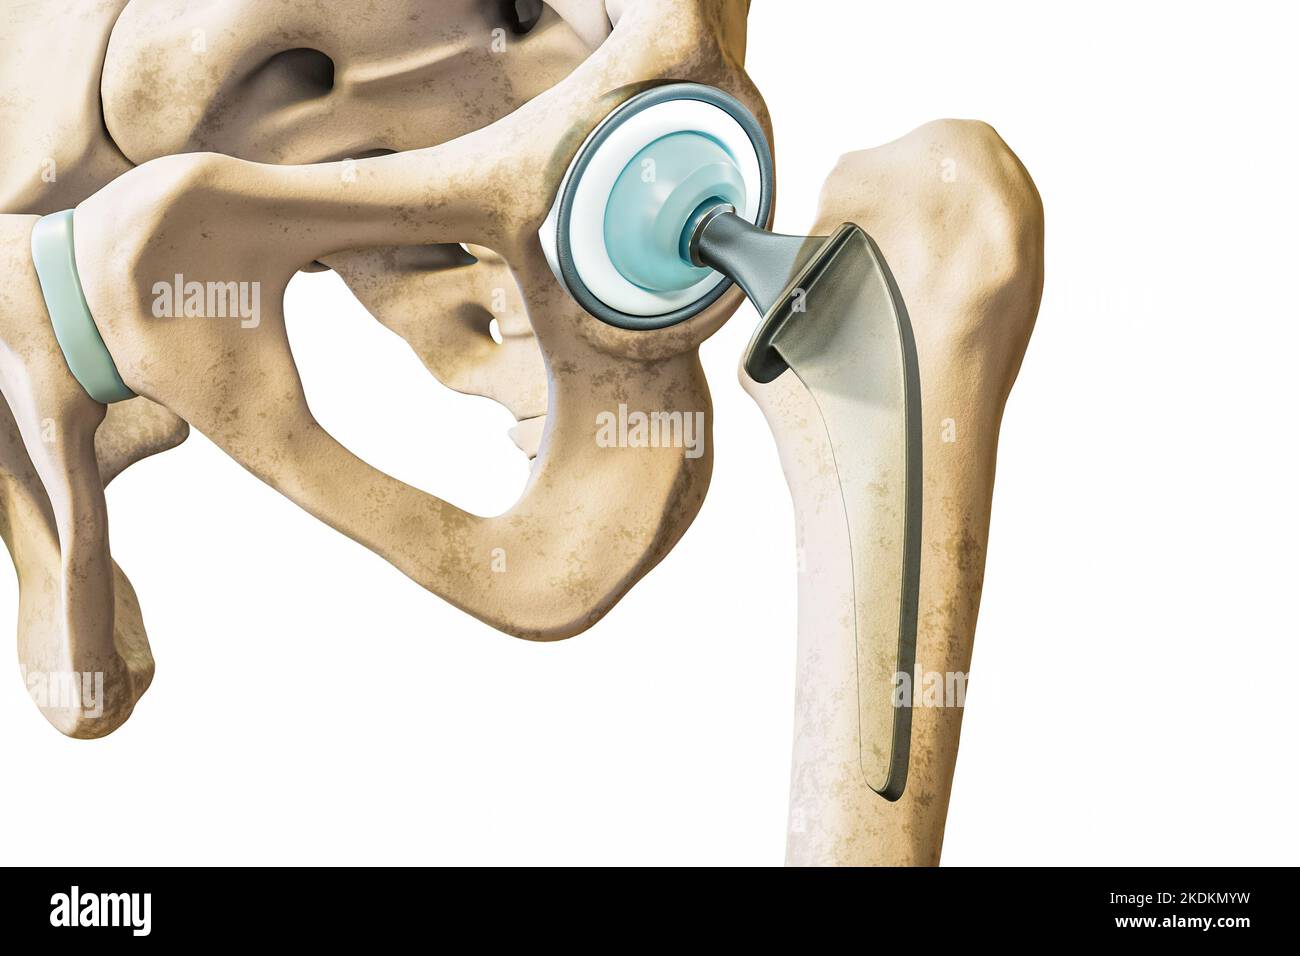 Hip prosthesis or implant isolated on white background close-up. Hip joint or femoral head replacement 3D rendering illustration. Medicine, medical an Stock Photo